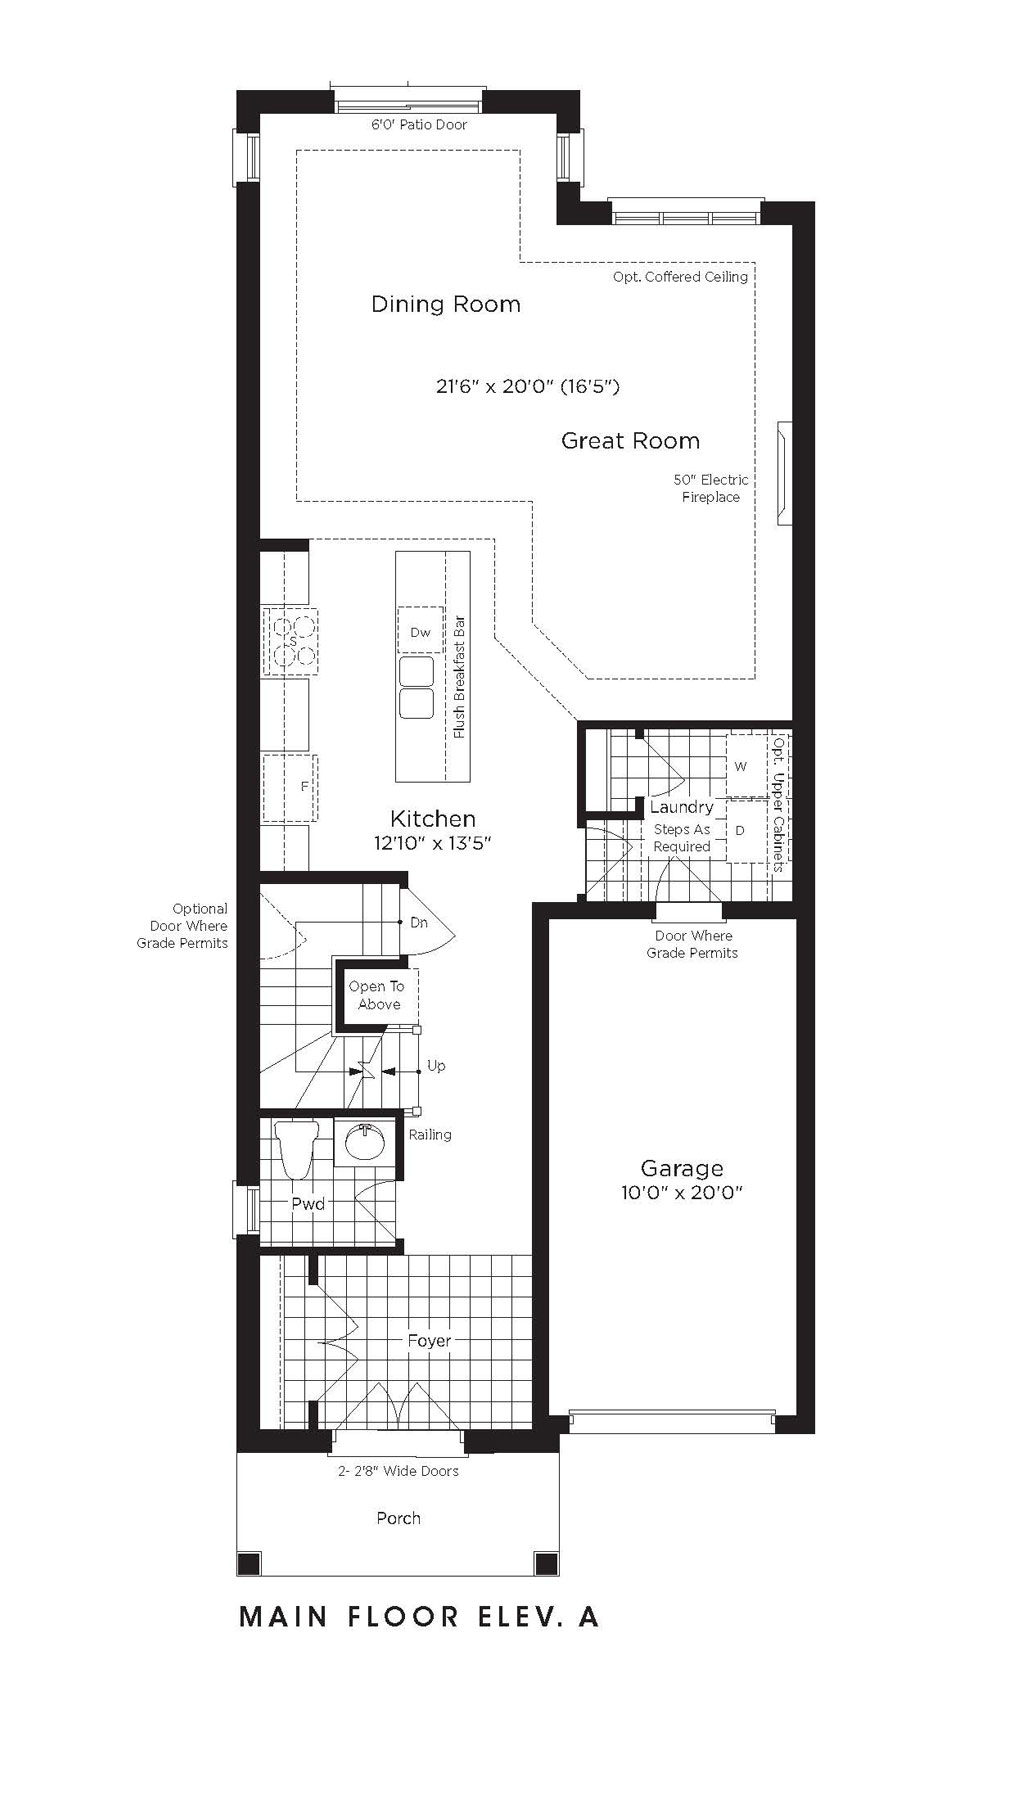  Floor Plan of Alcona by the Lake with undefined beds